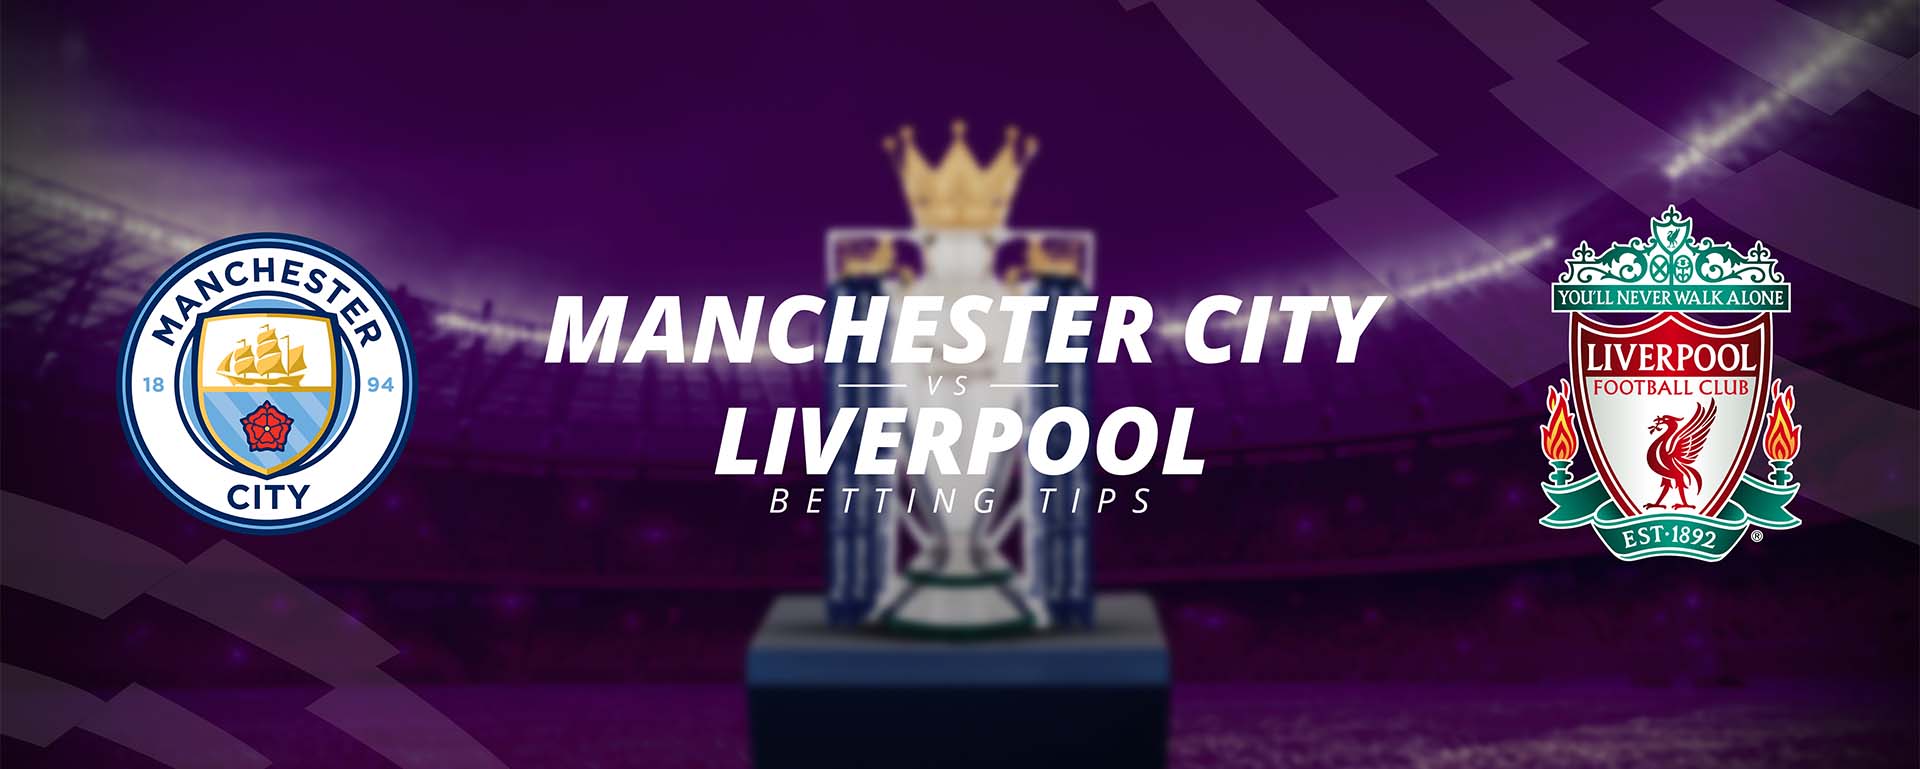 MANCHESTER CITY VS LIVERPOOL: BETTING TIPS